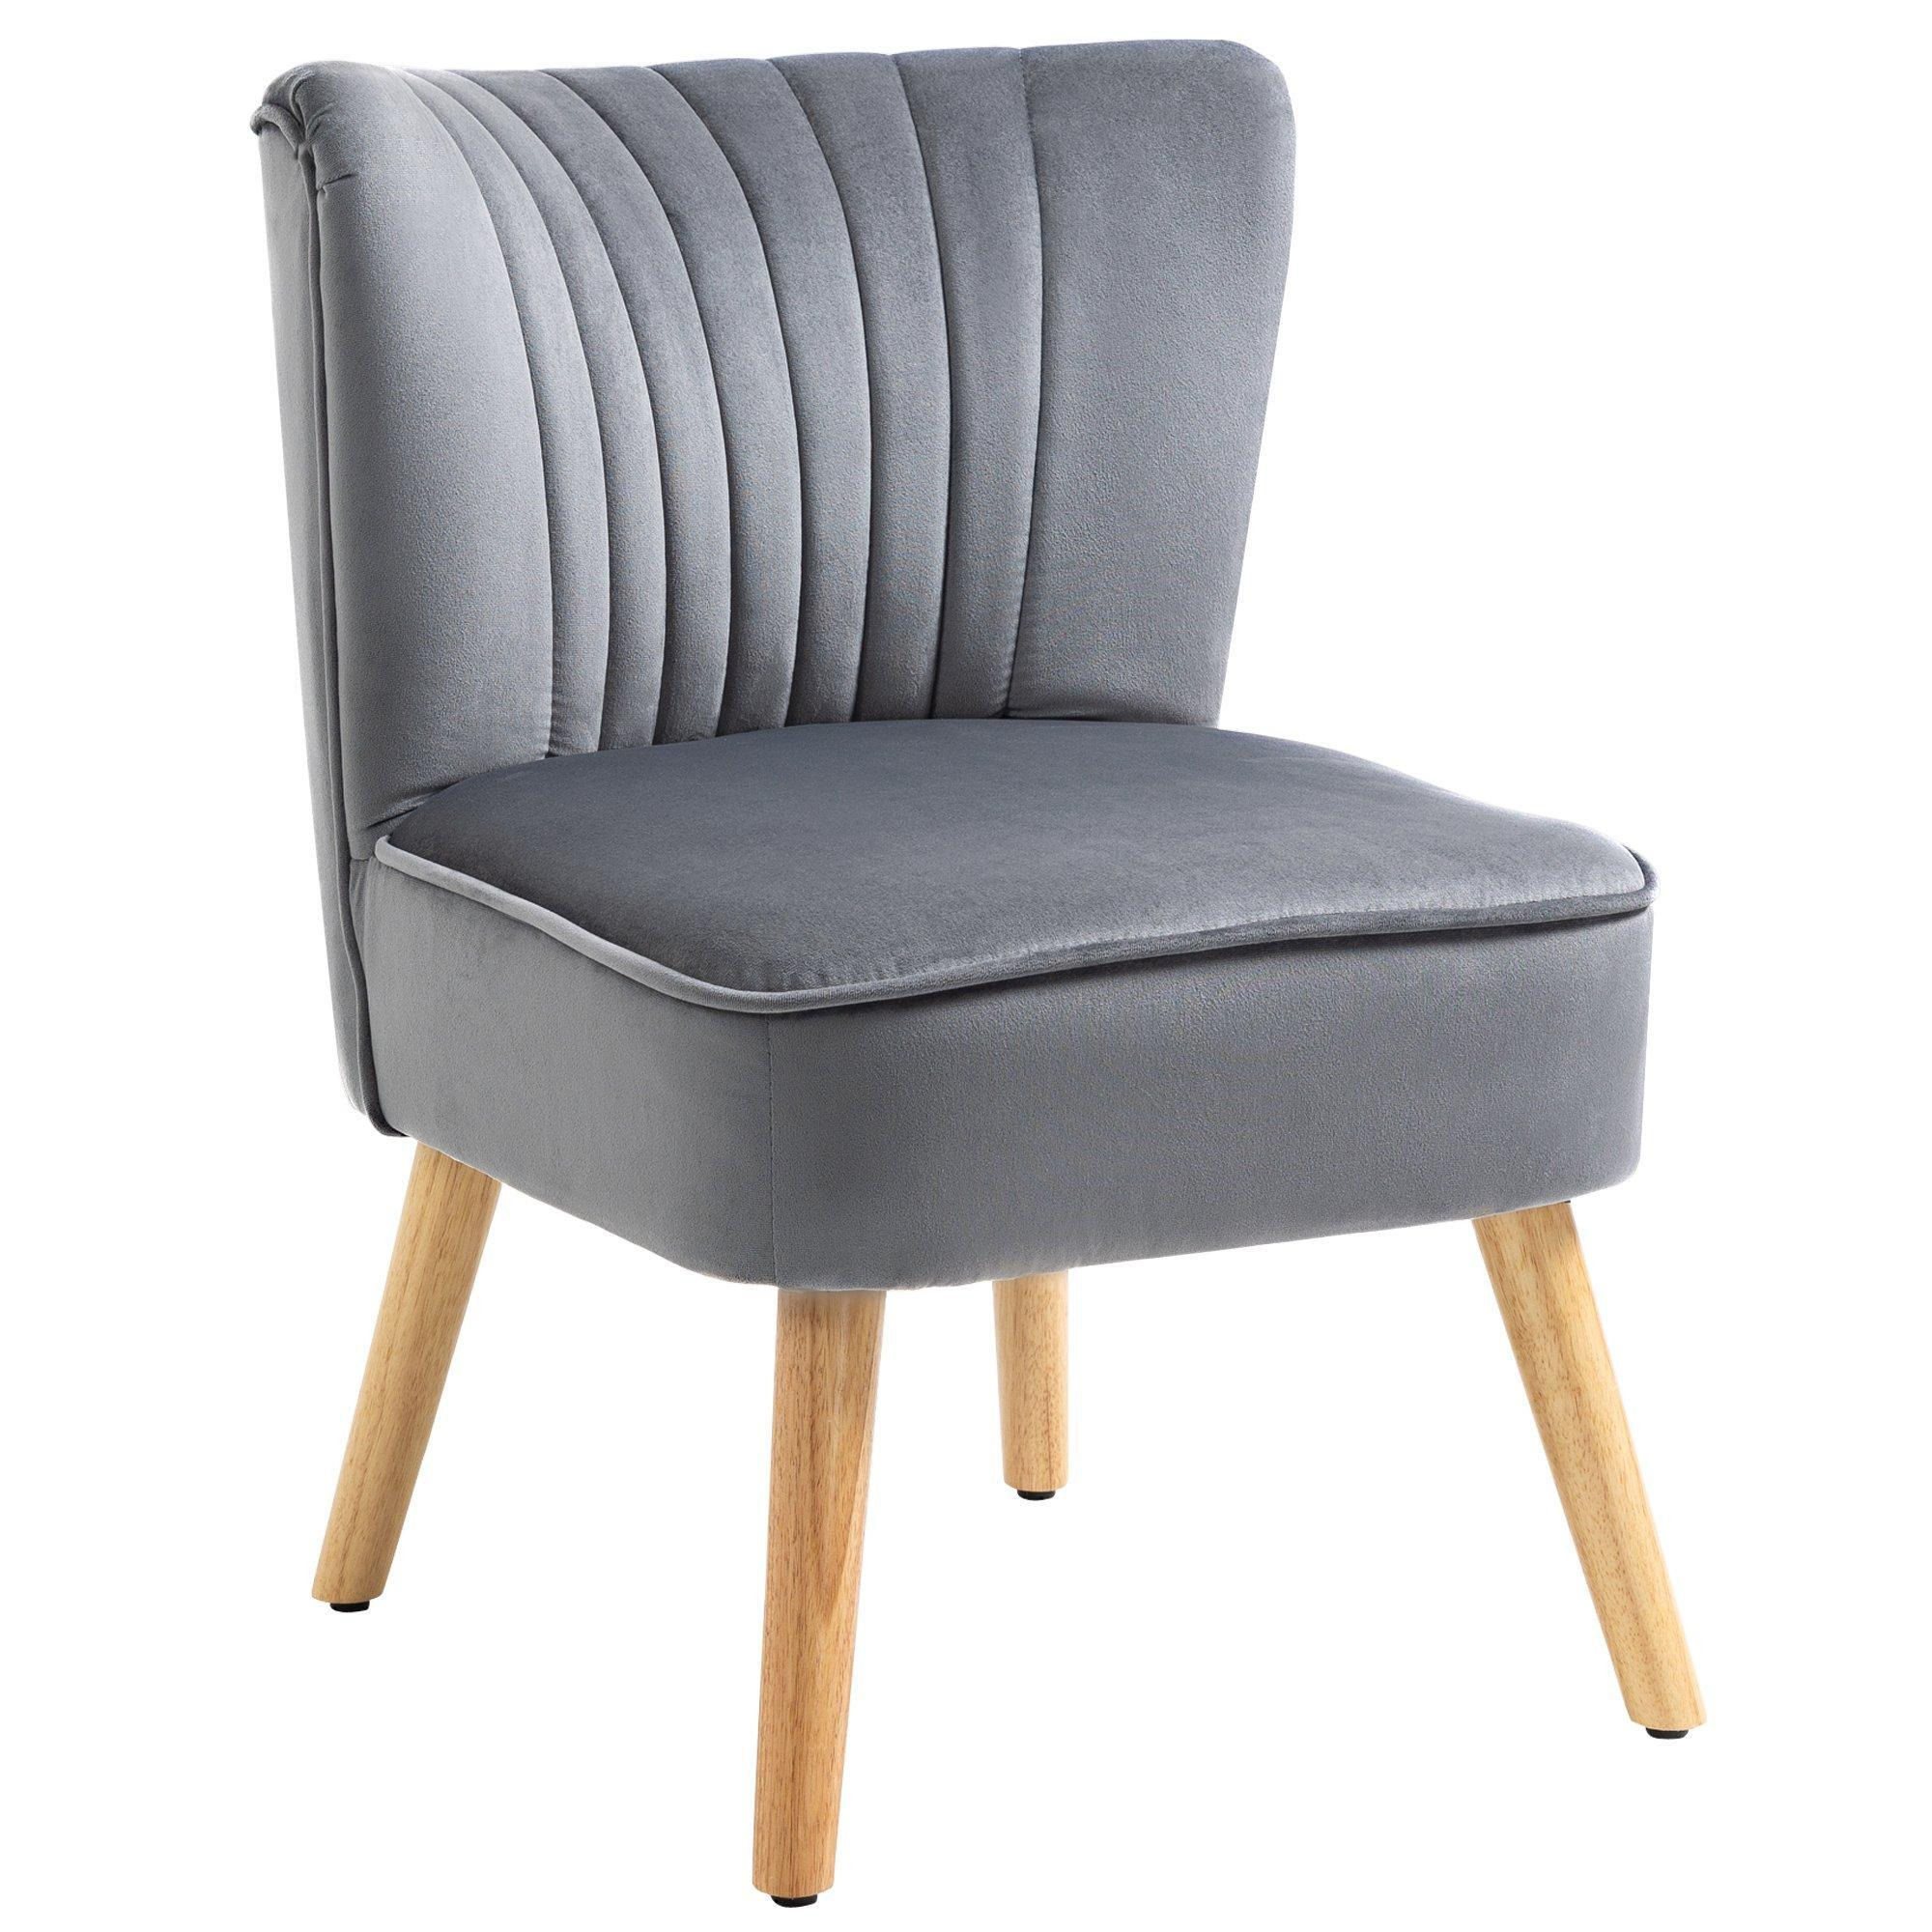 Fabric Accent Chair Leisure Chair with Wood Legs and Armless Design - image 1